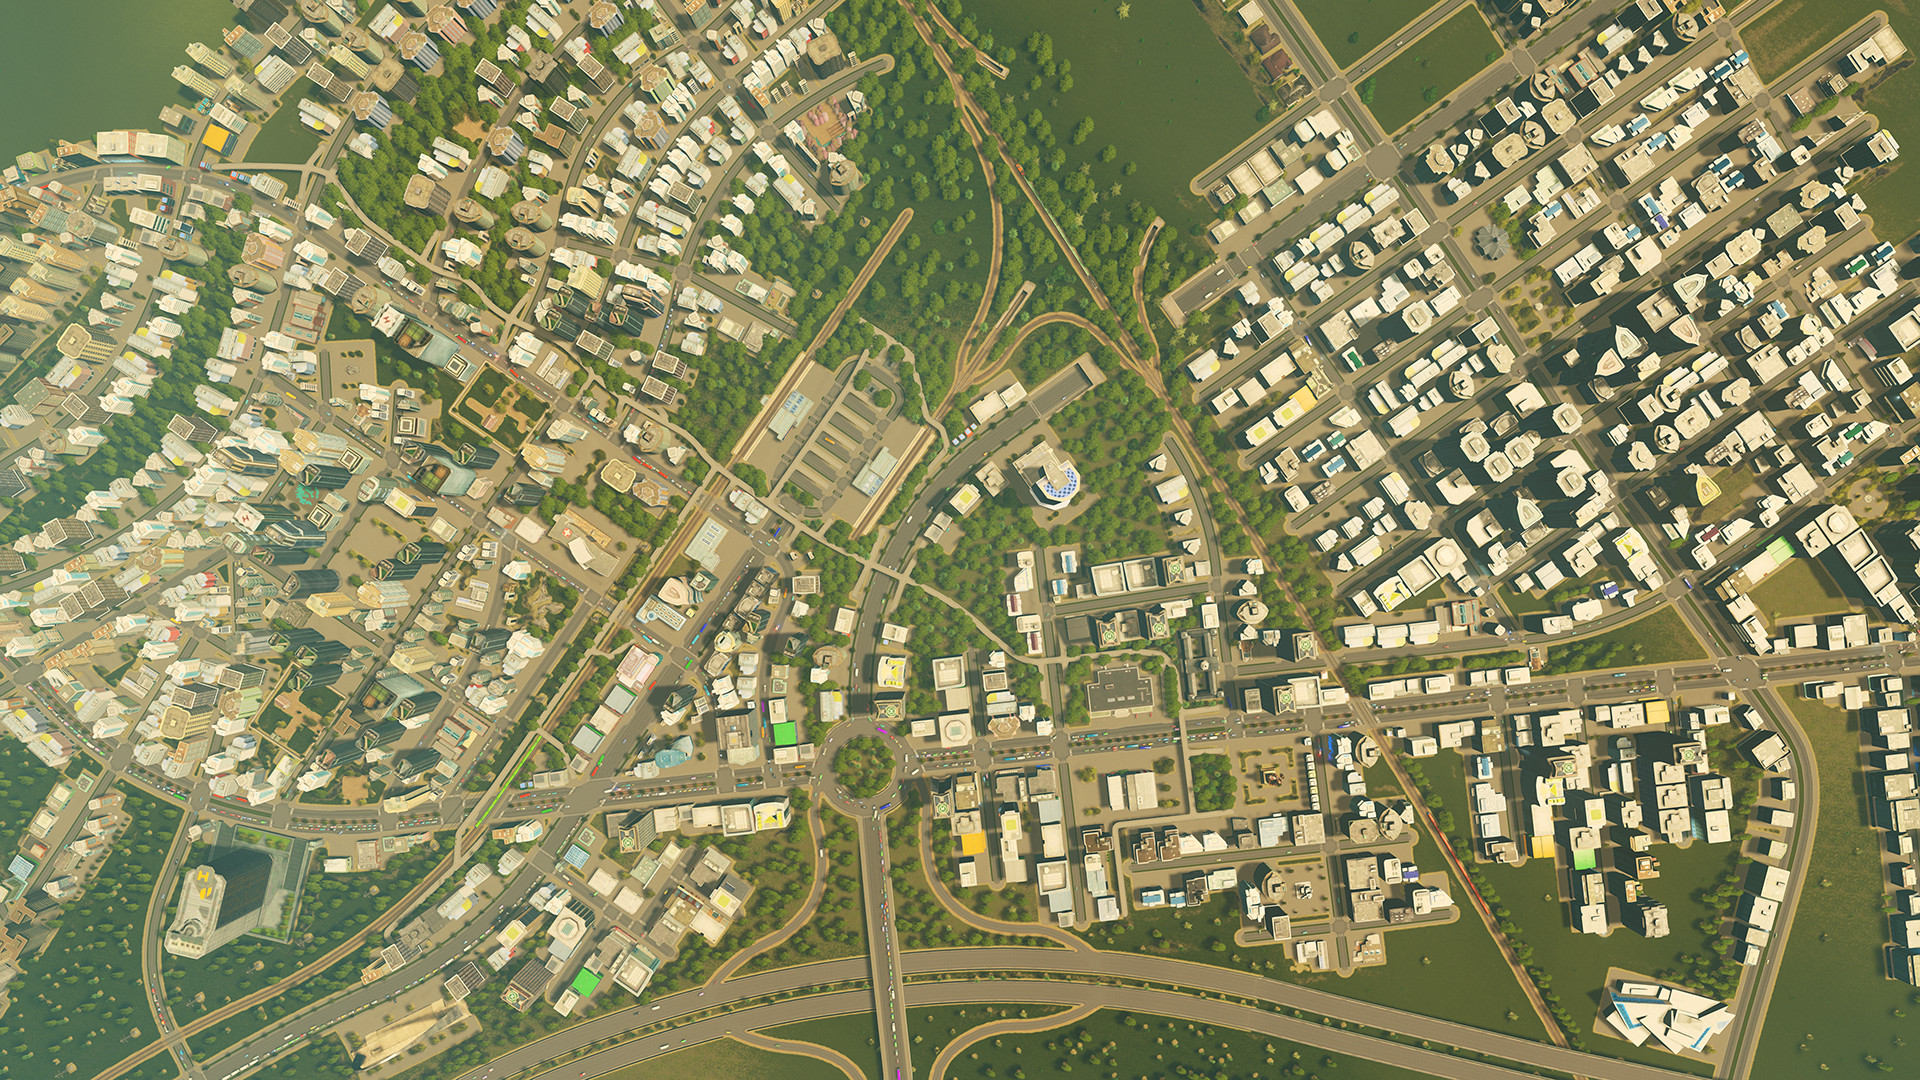 Will Cities: Skylines 2 have multiplayer? – Destructoid